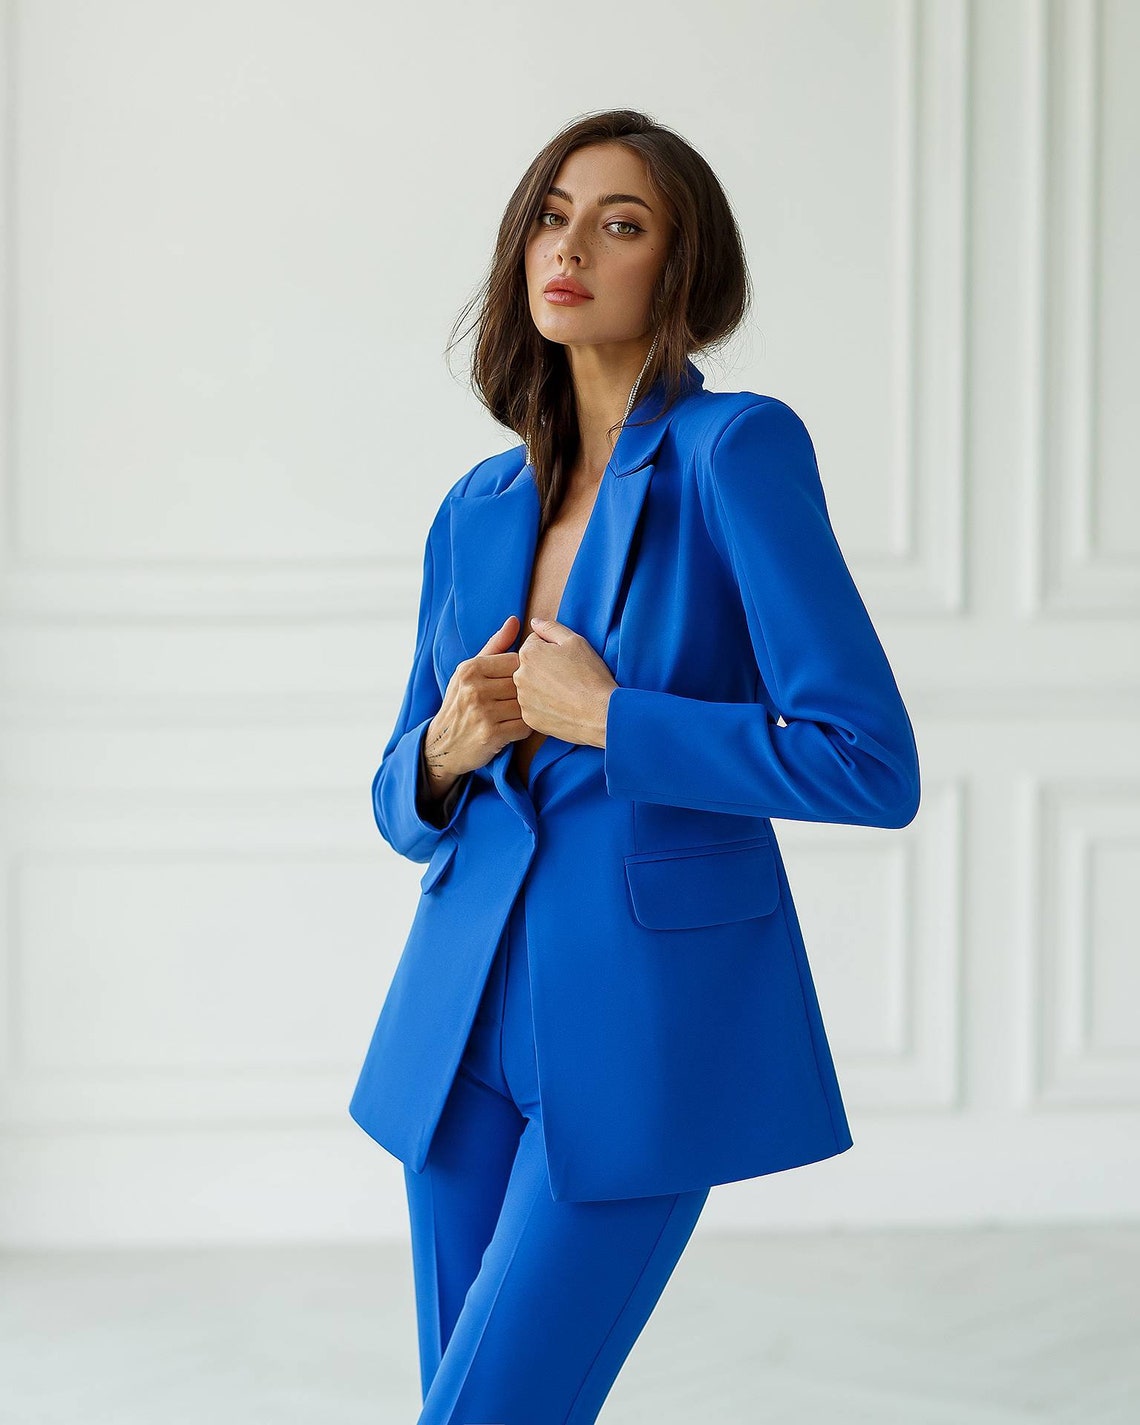 Electric Blue Formal Pants Suit With Single Breasted Blazer - Etsy